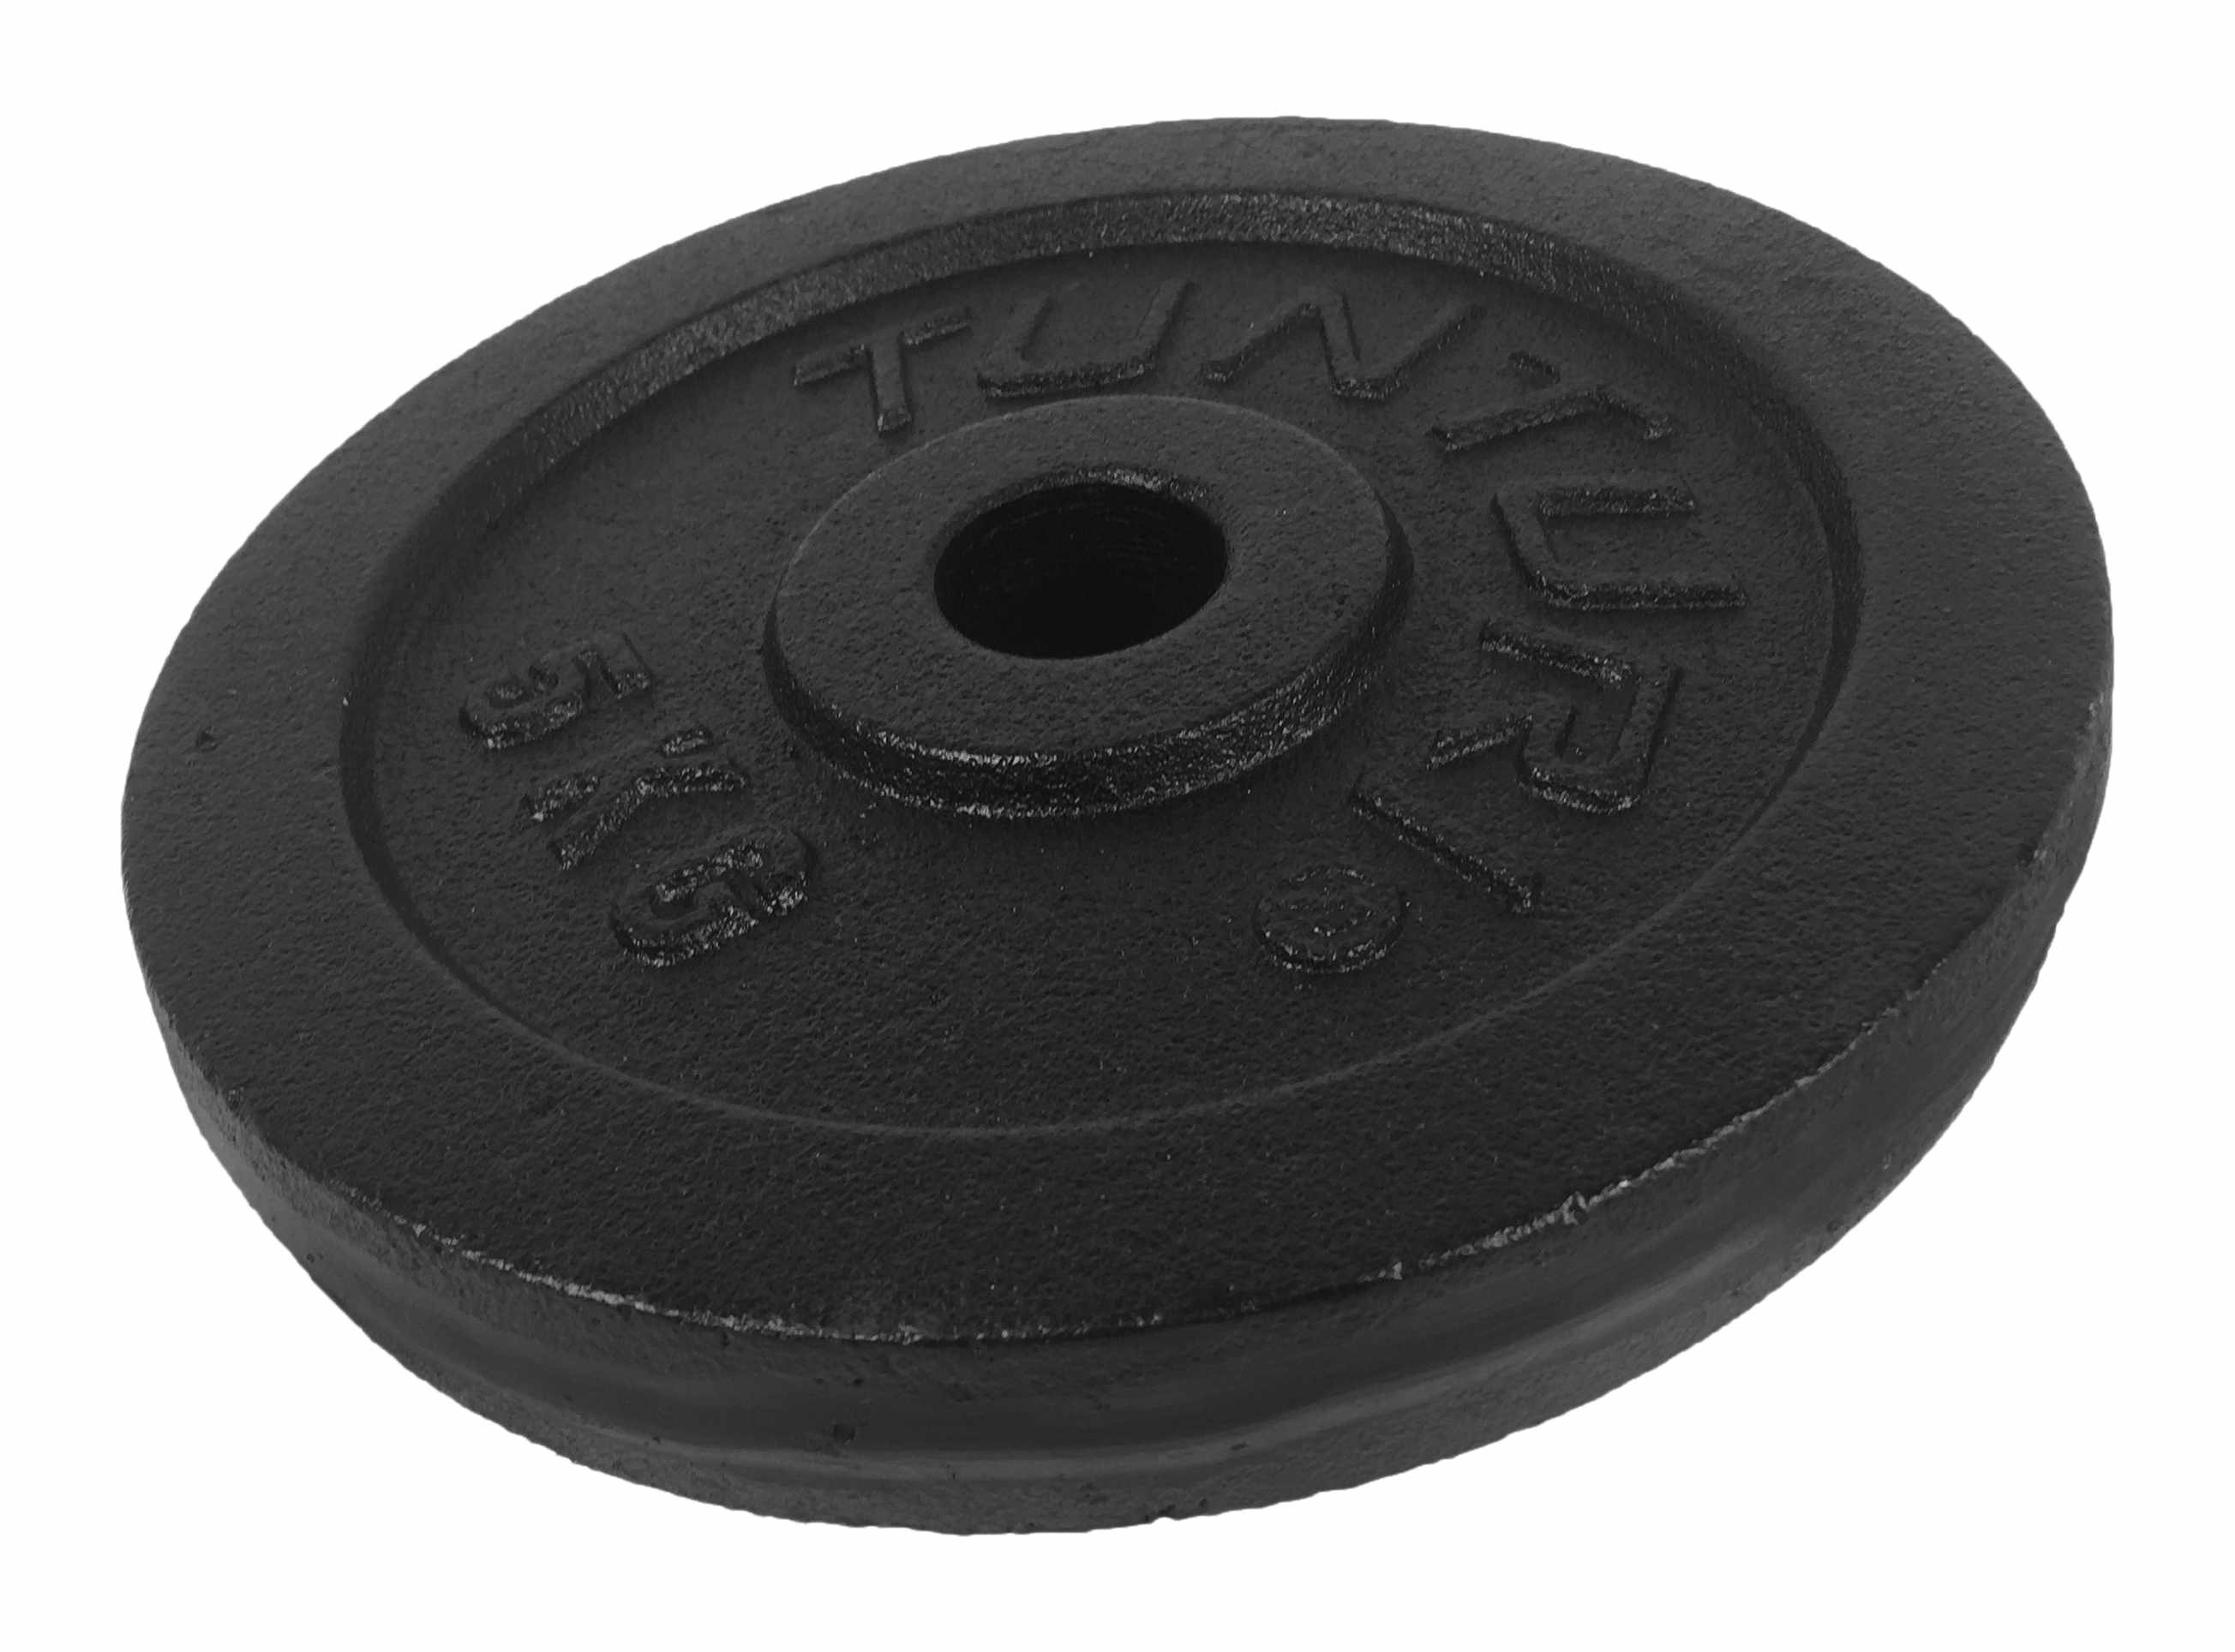 Marcy Plate 1x 5 kg Black